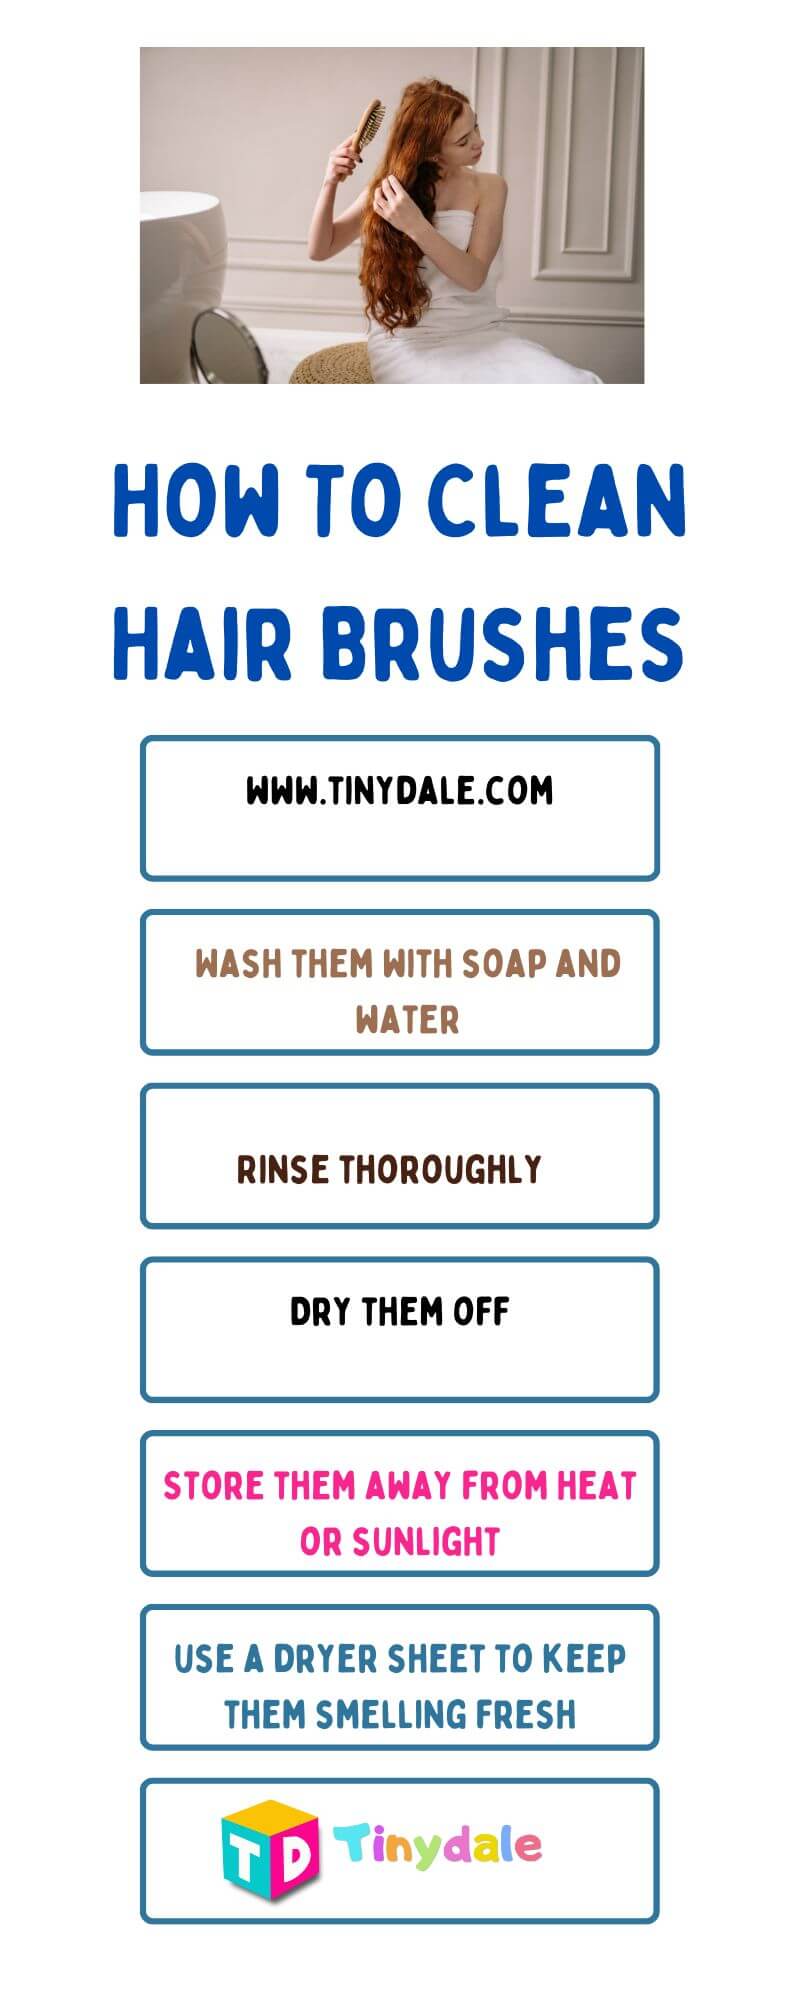 How To Clean Hair Brushes in 5 steps infographics